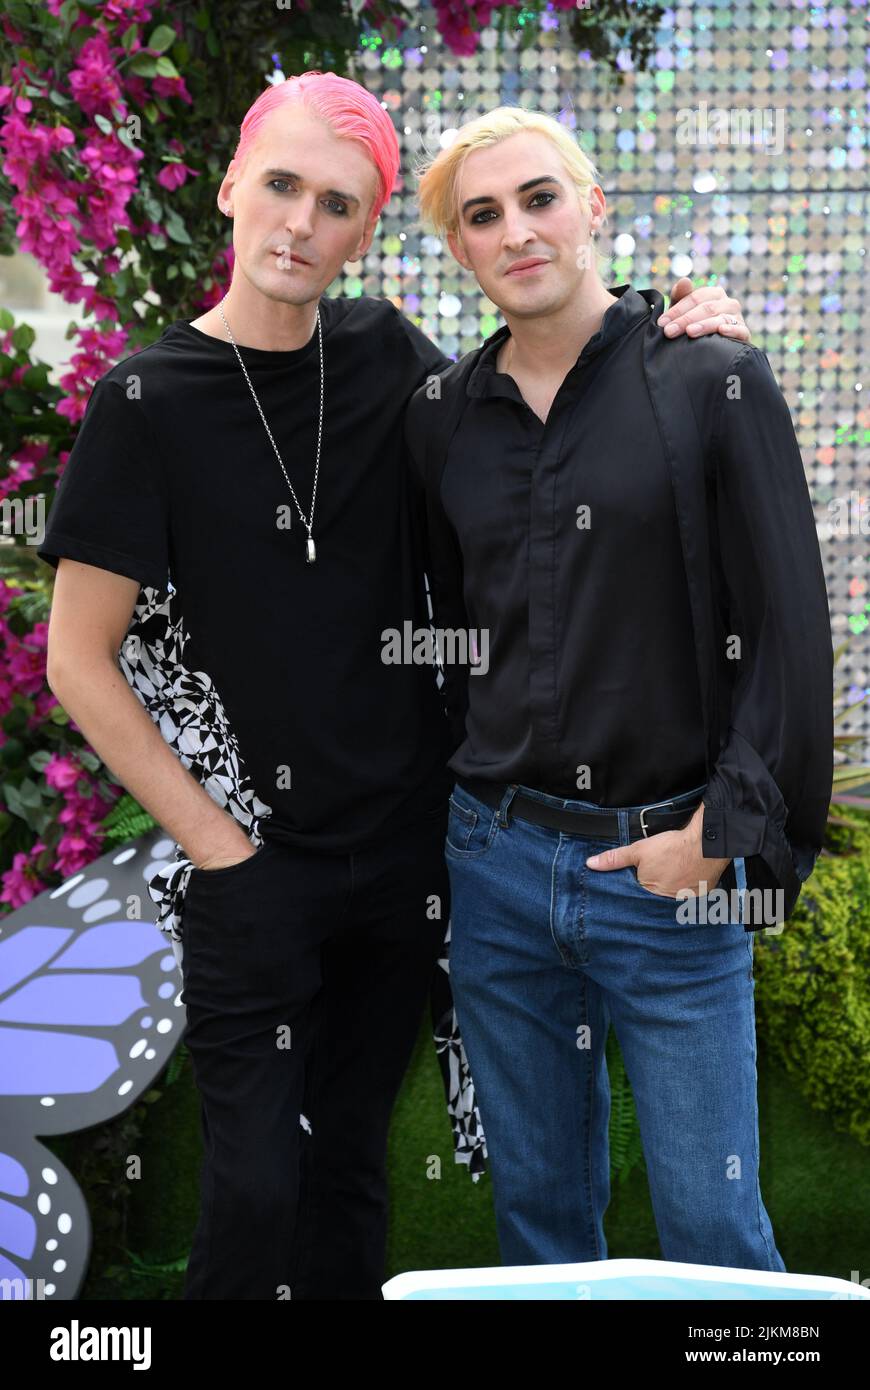 London, UK. 02nd Aug, 2022. August 2nd, 2022. London, UK. Gareth Pugh and Carson McColl at the opening night of This Bright Land by Gareth Pugh at Somerset House, London. Credit: Doug Peters/Alamy Live News Stock Photo